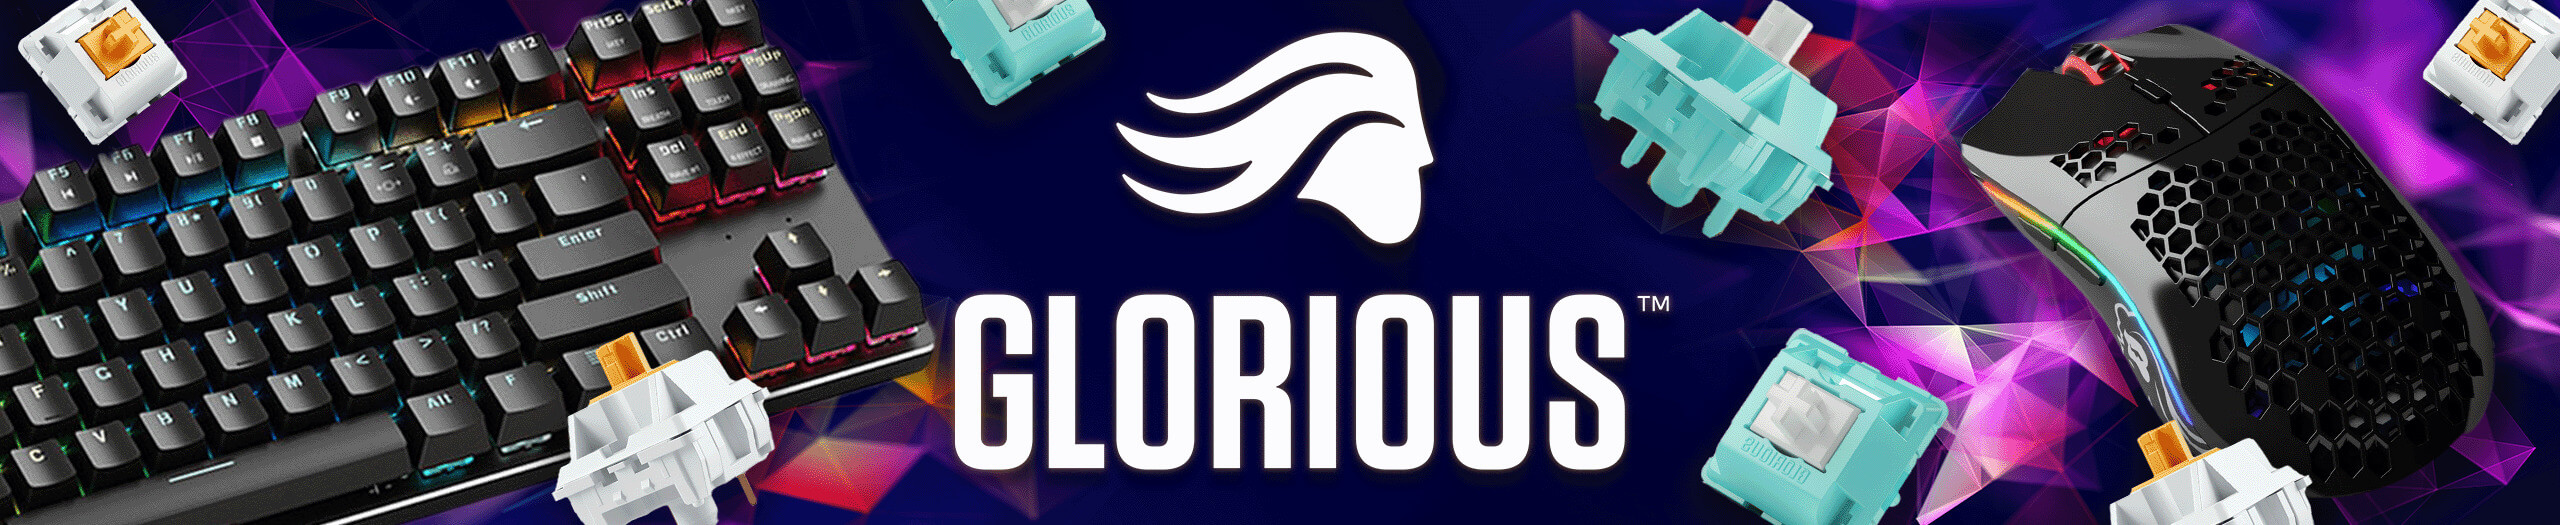 Glorius Products Banner